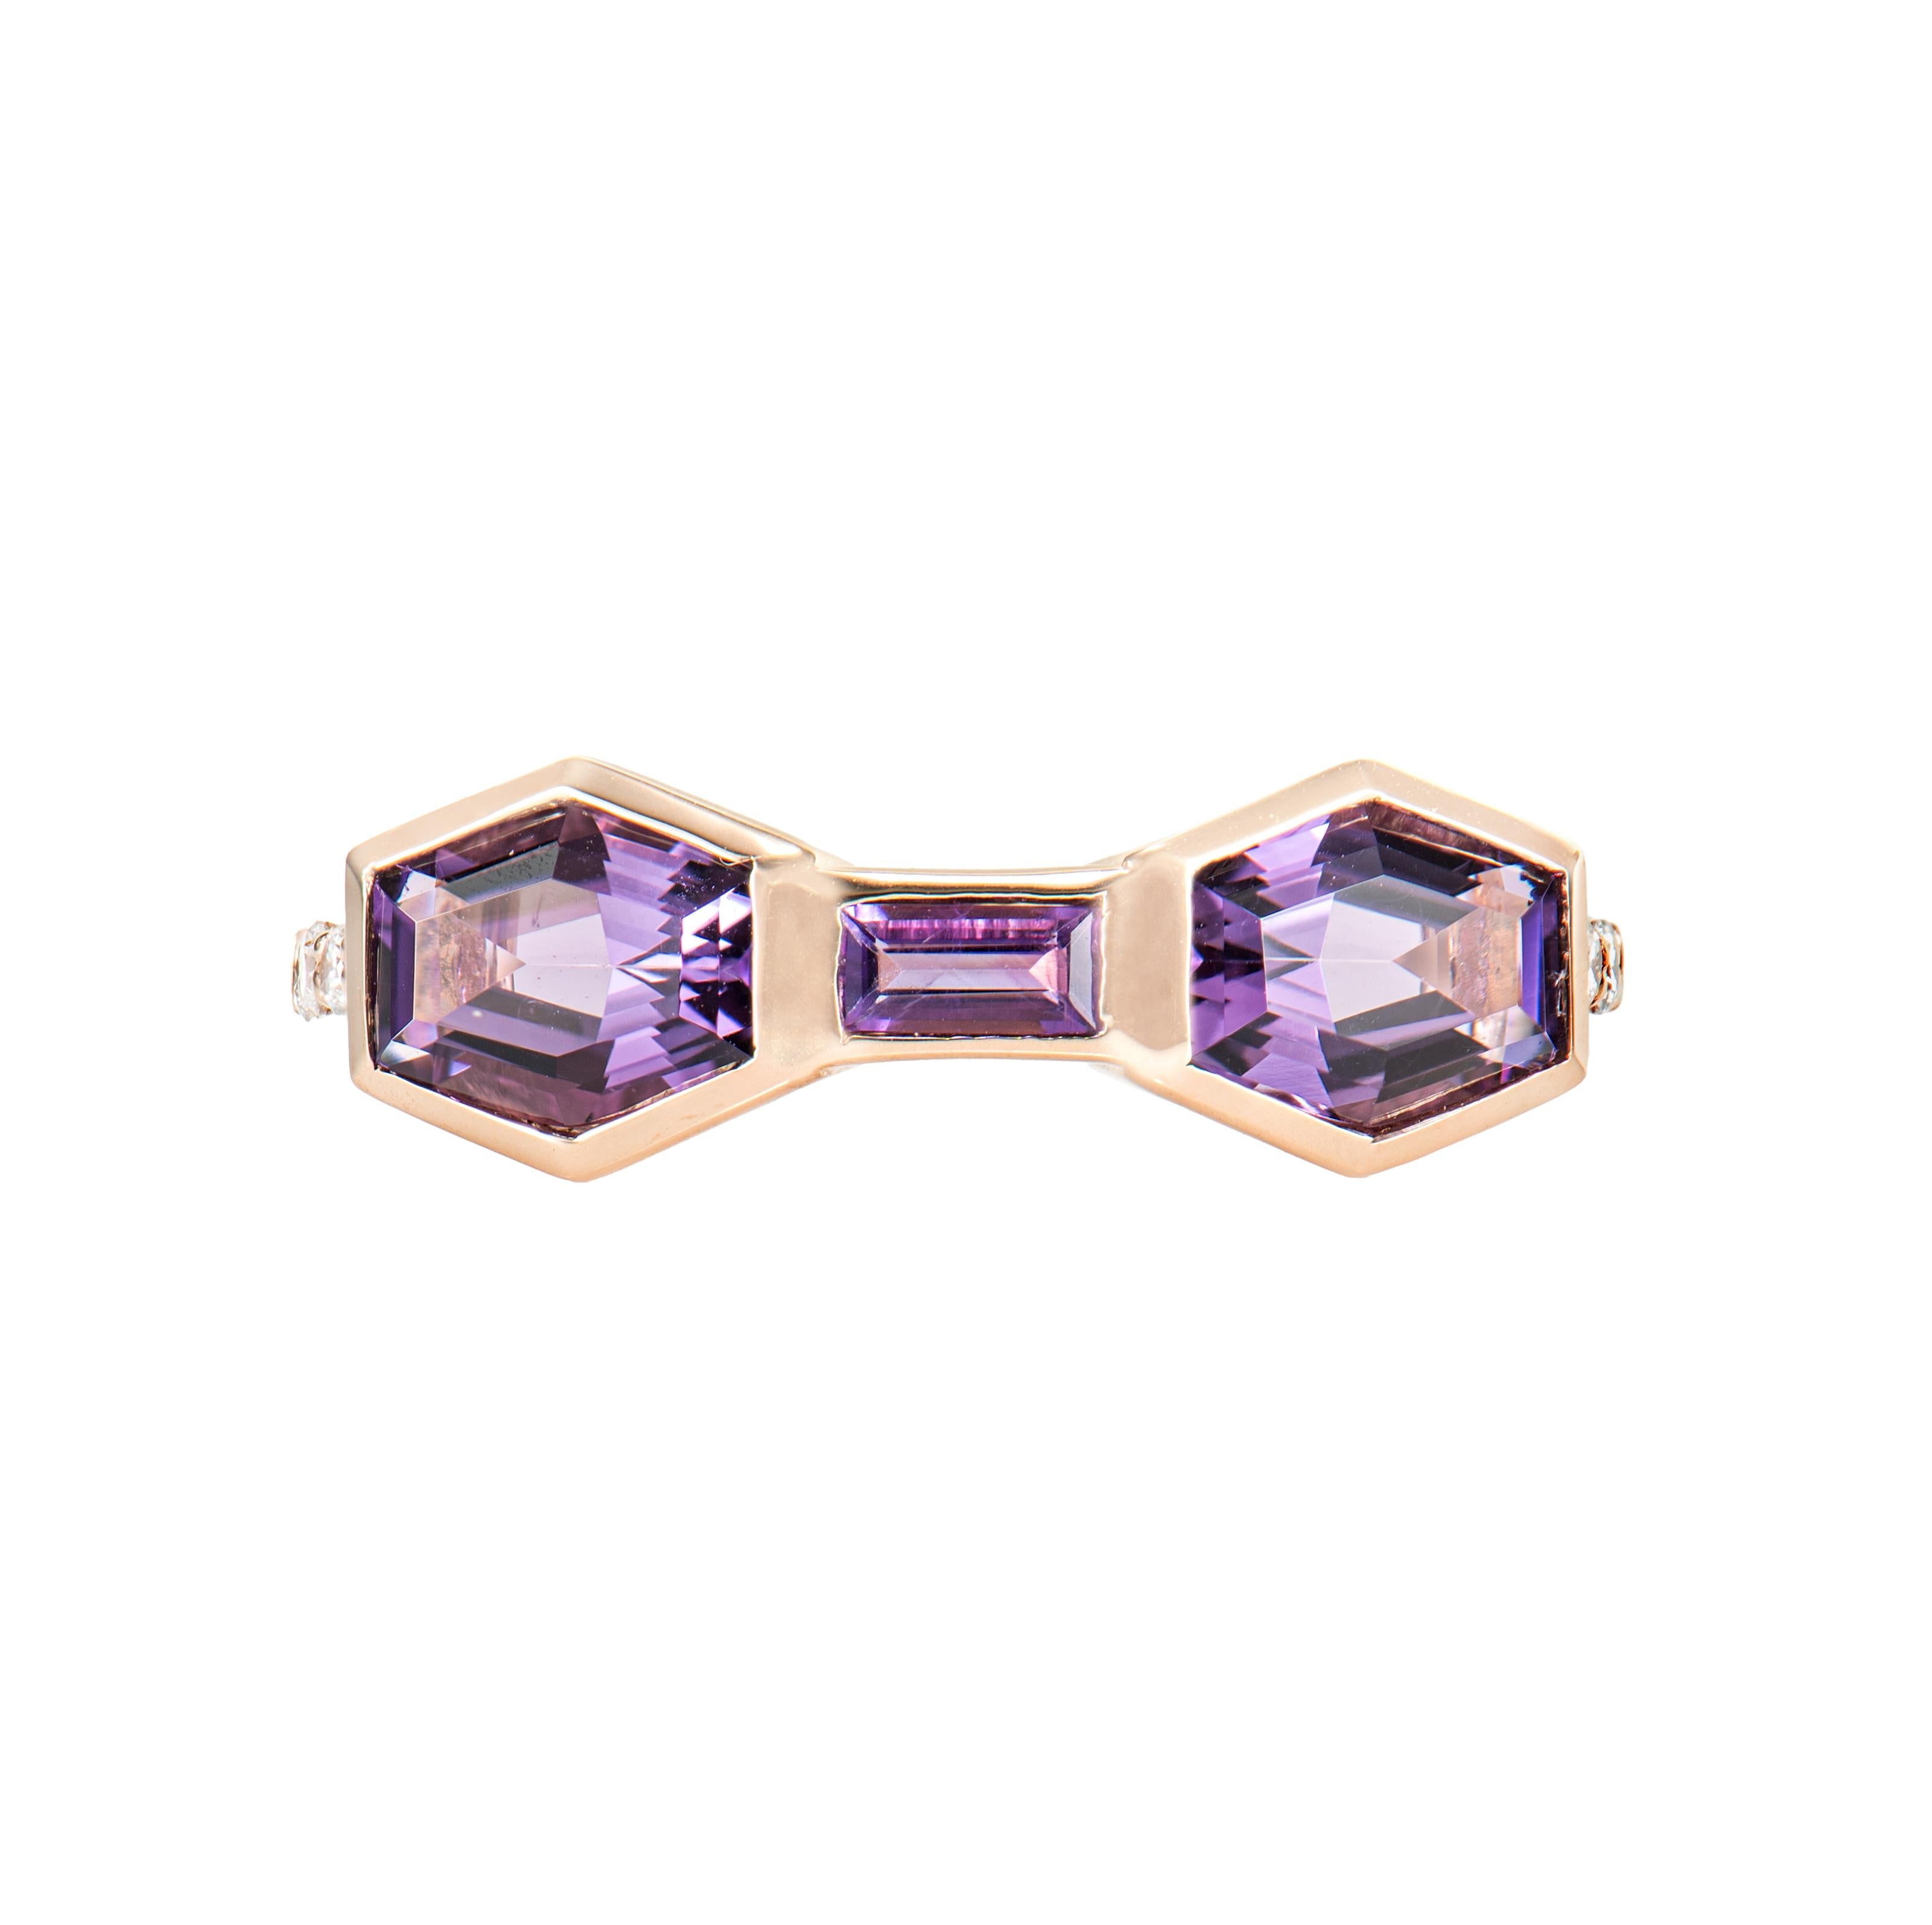 Contemporary 1.49 Carat Amethyst Fancy Ring in 14Karat Rose Gold with Diamond. For Sale